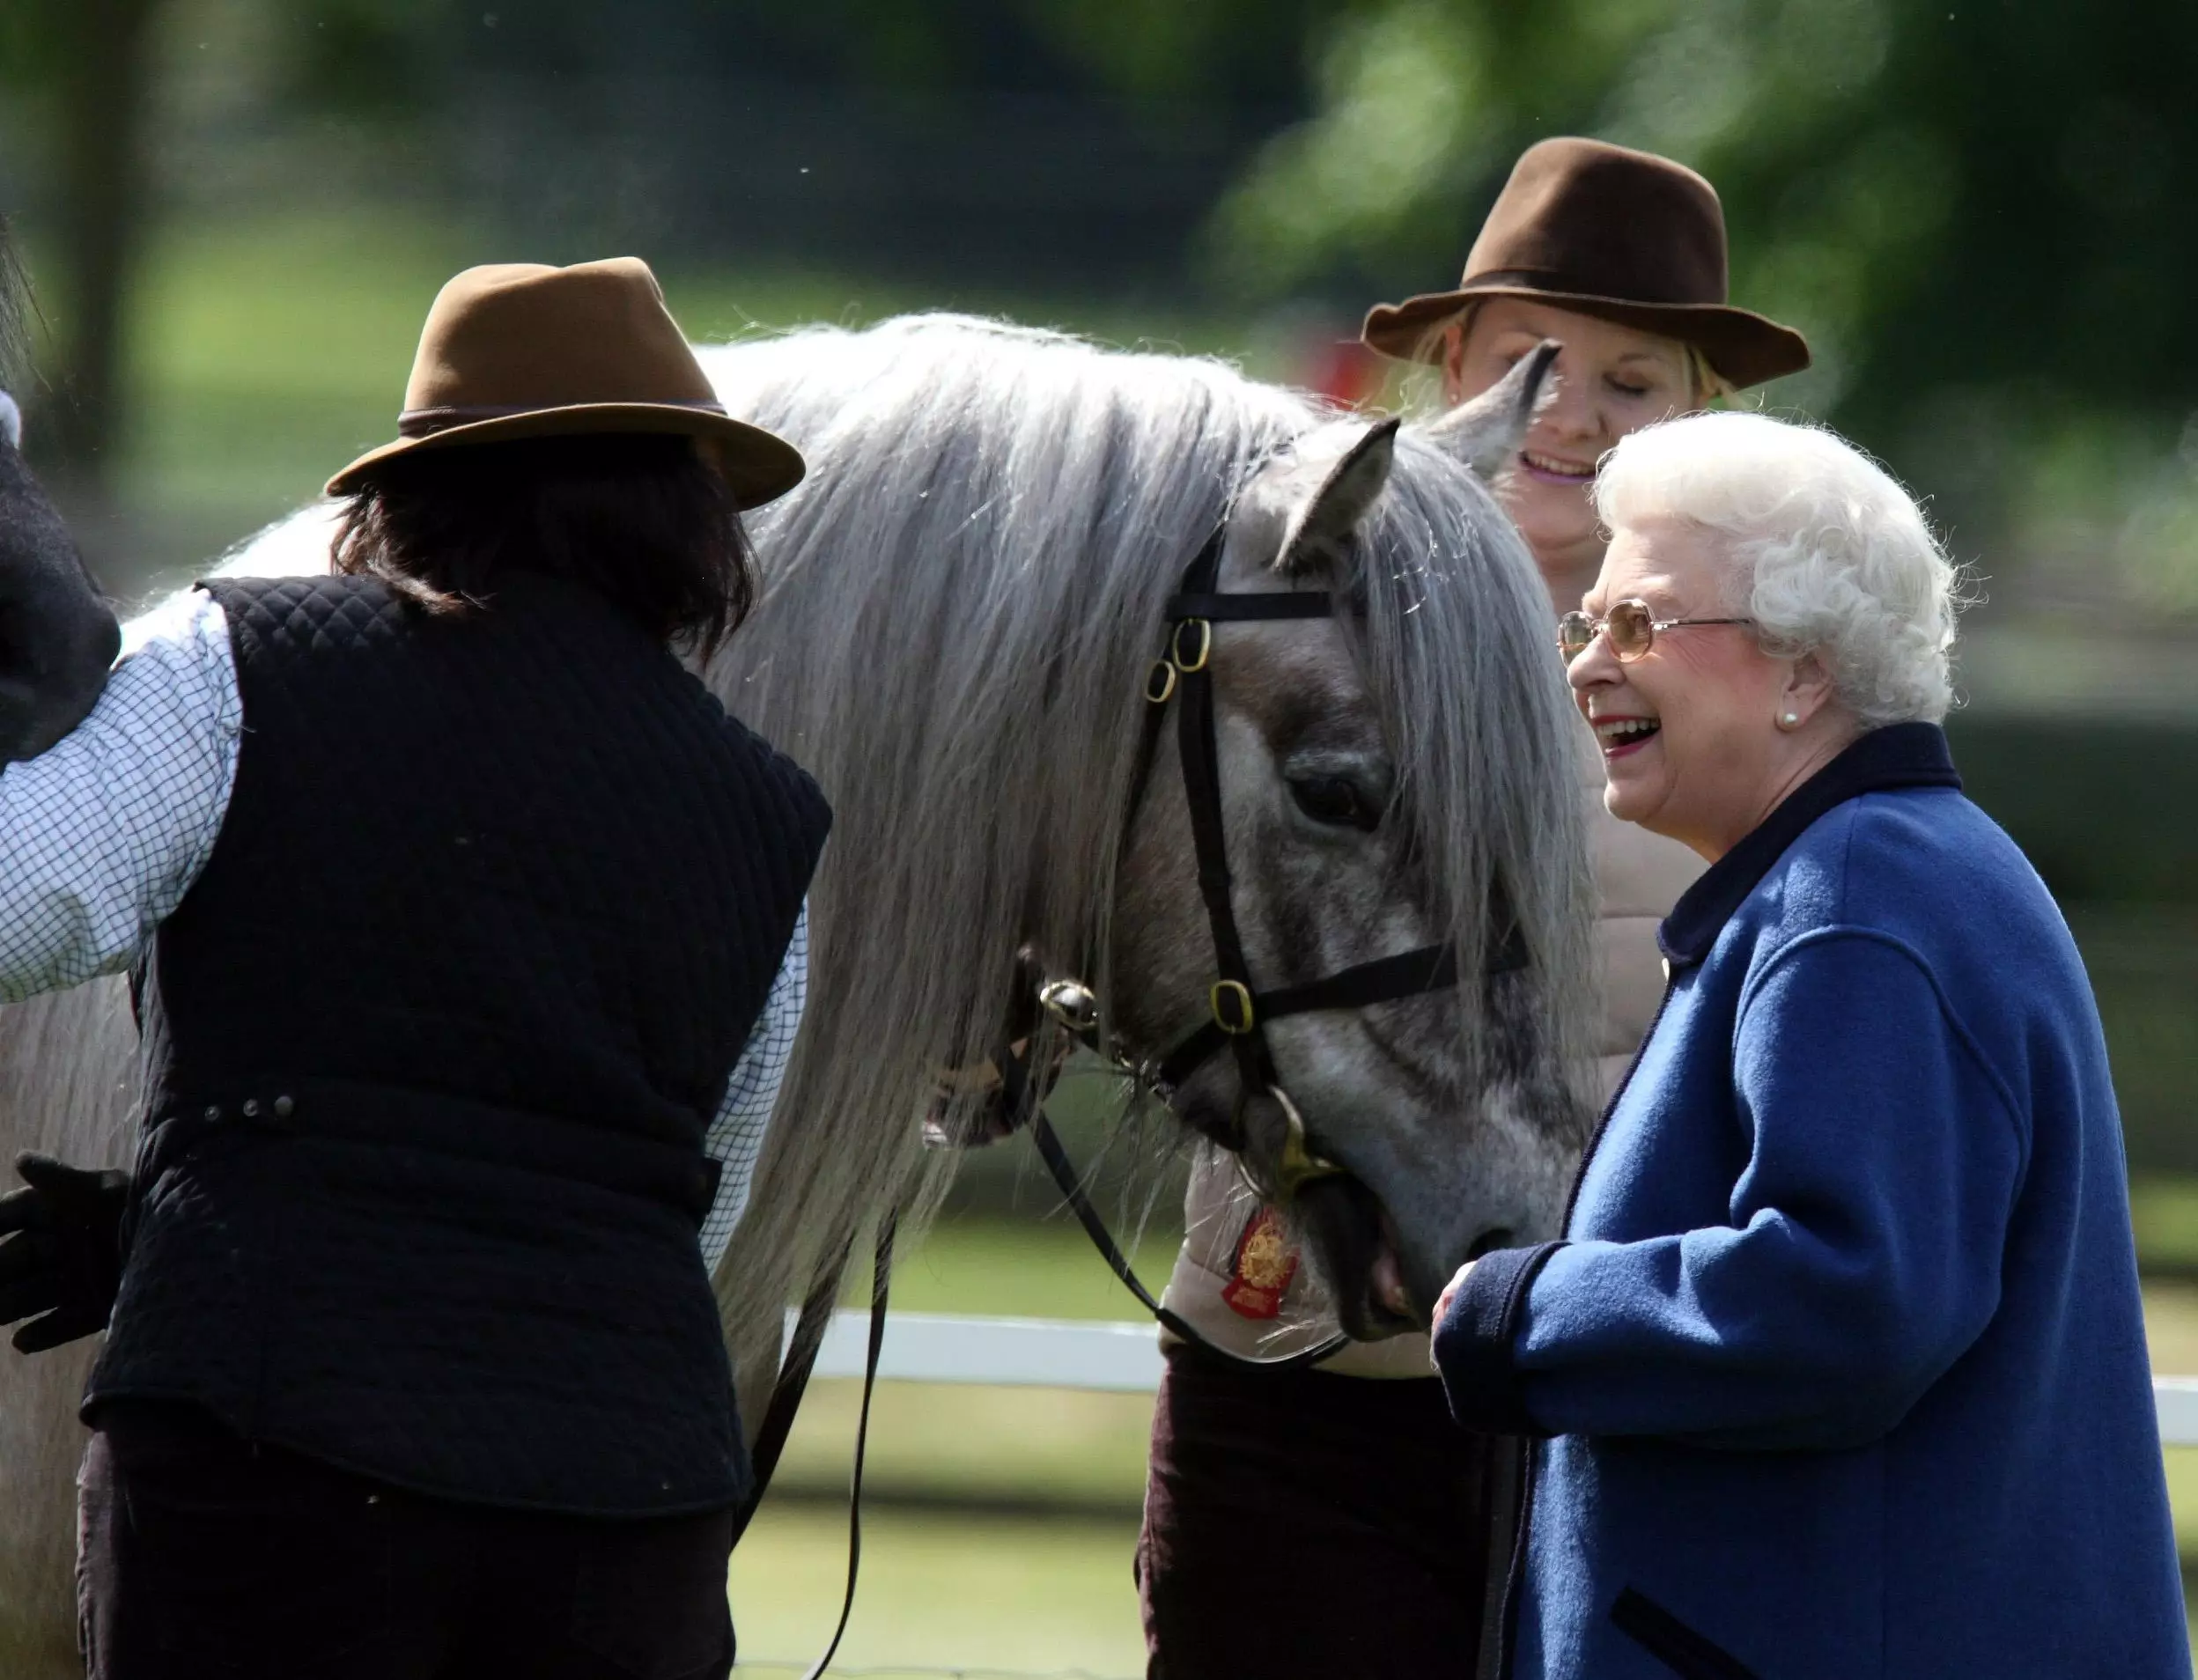 The Queen famously loves her horses and you could help look after them.